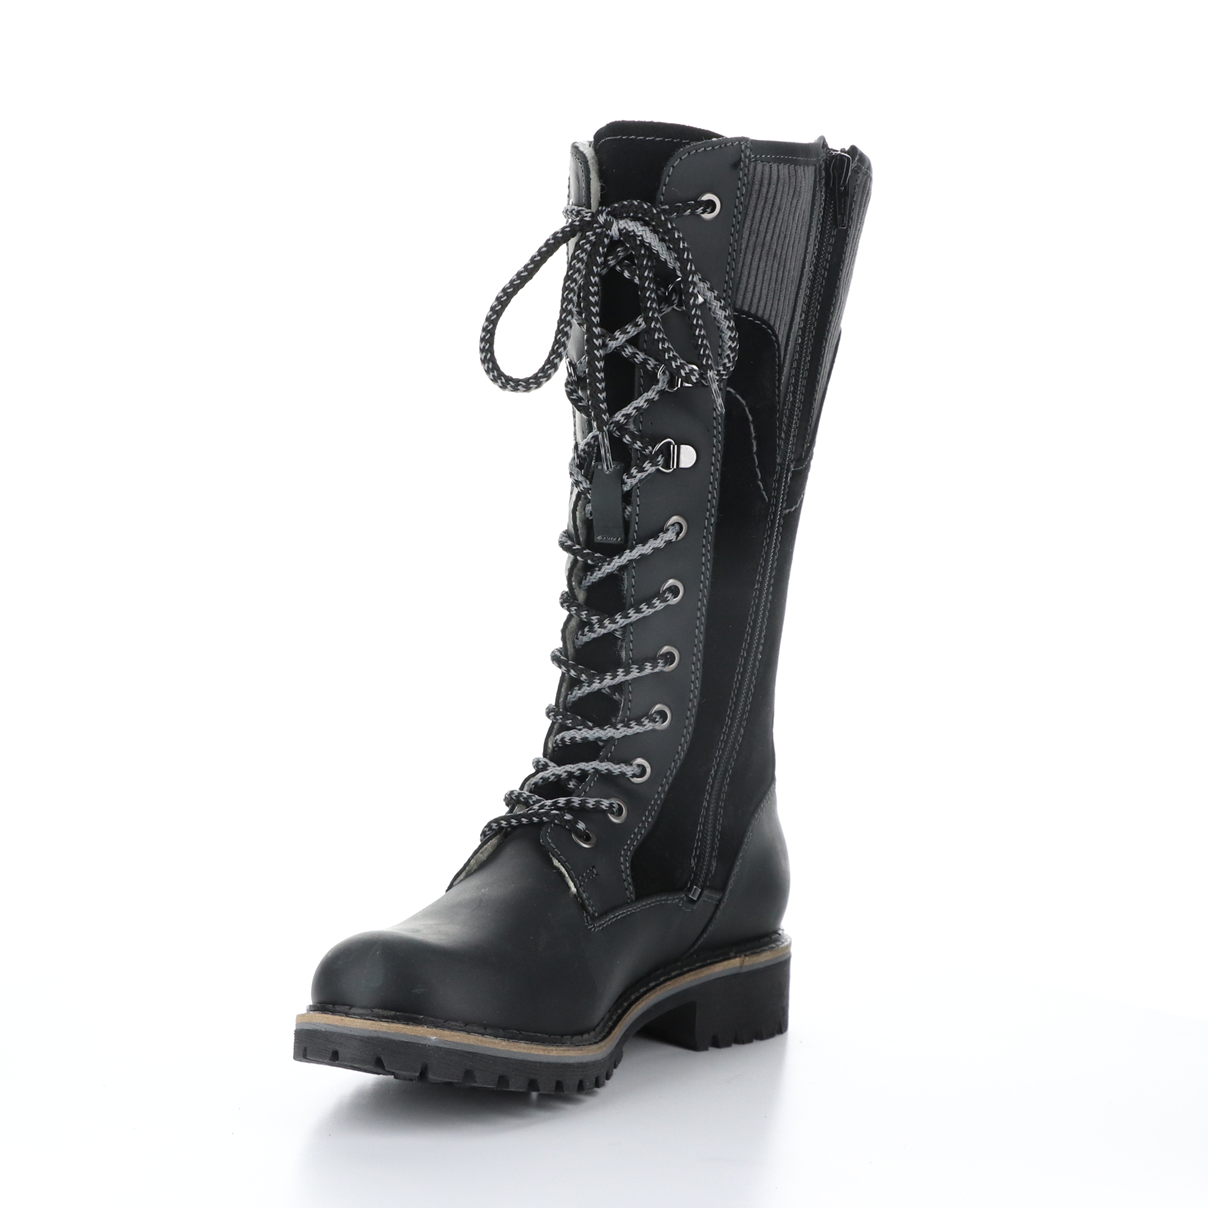 Inner front side view of the bos & co harrsion boot in the color black/grey. This boot is calf-height. It has a lace up front and panels of suede leather, burnished leather, and corduroy.  The inner side of this boot has a zipper.